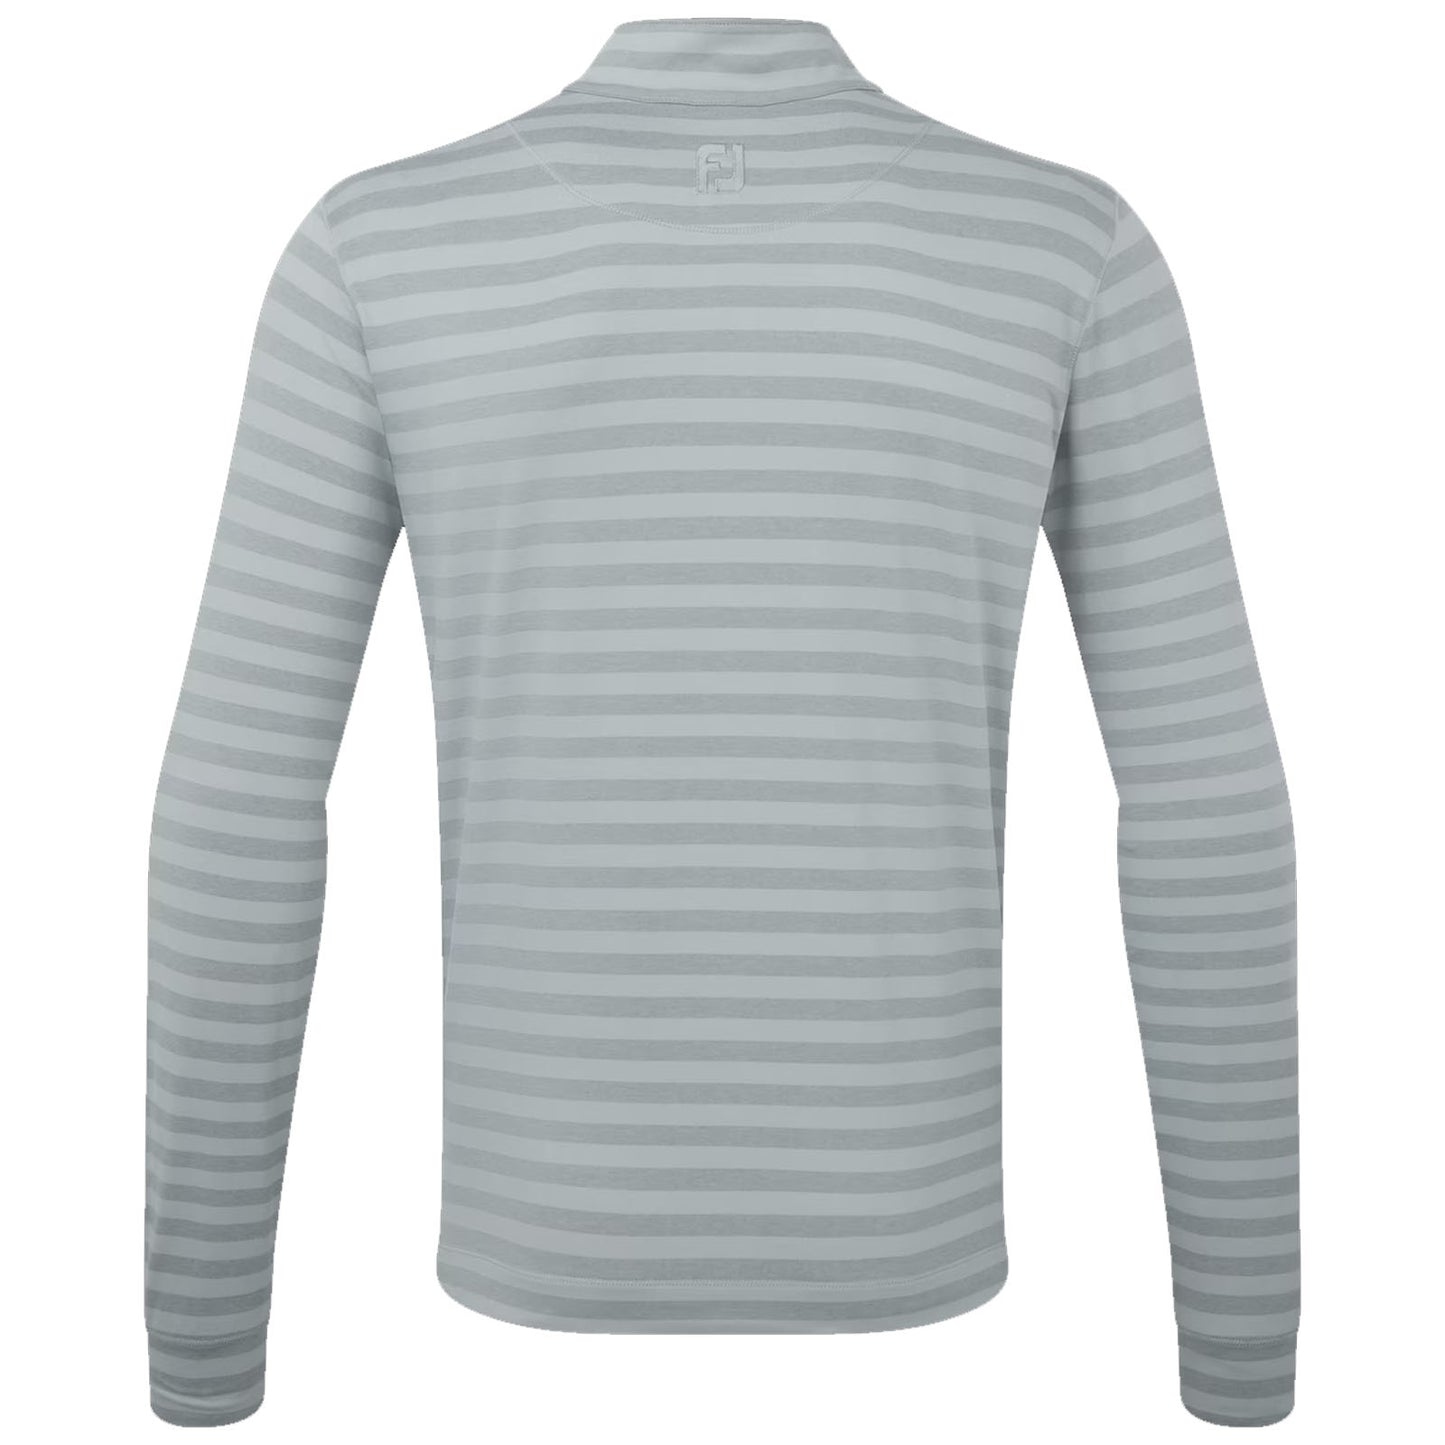 FootJoy Mens Peached Tonal Stripe Chill-Out Half Zip